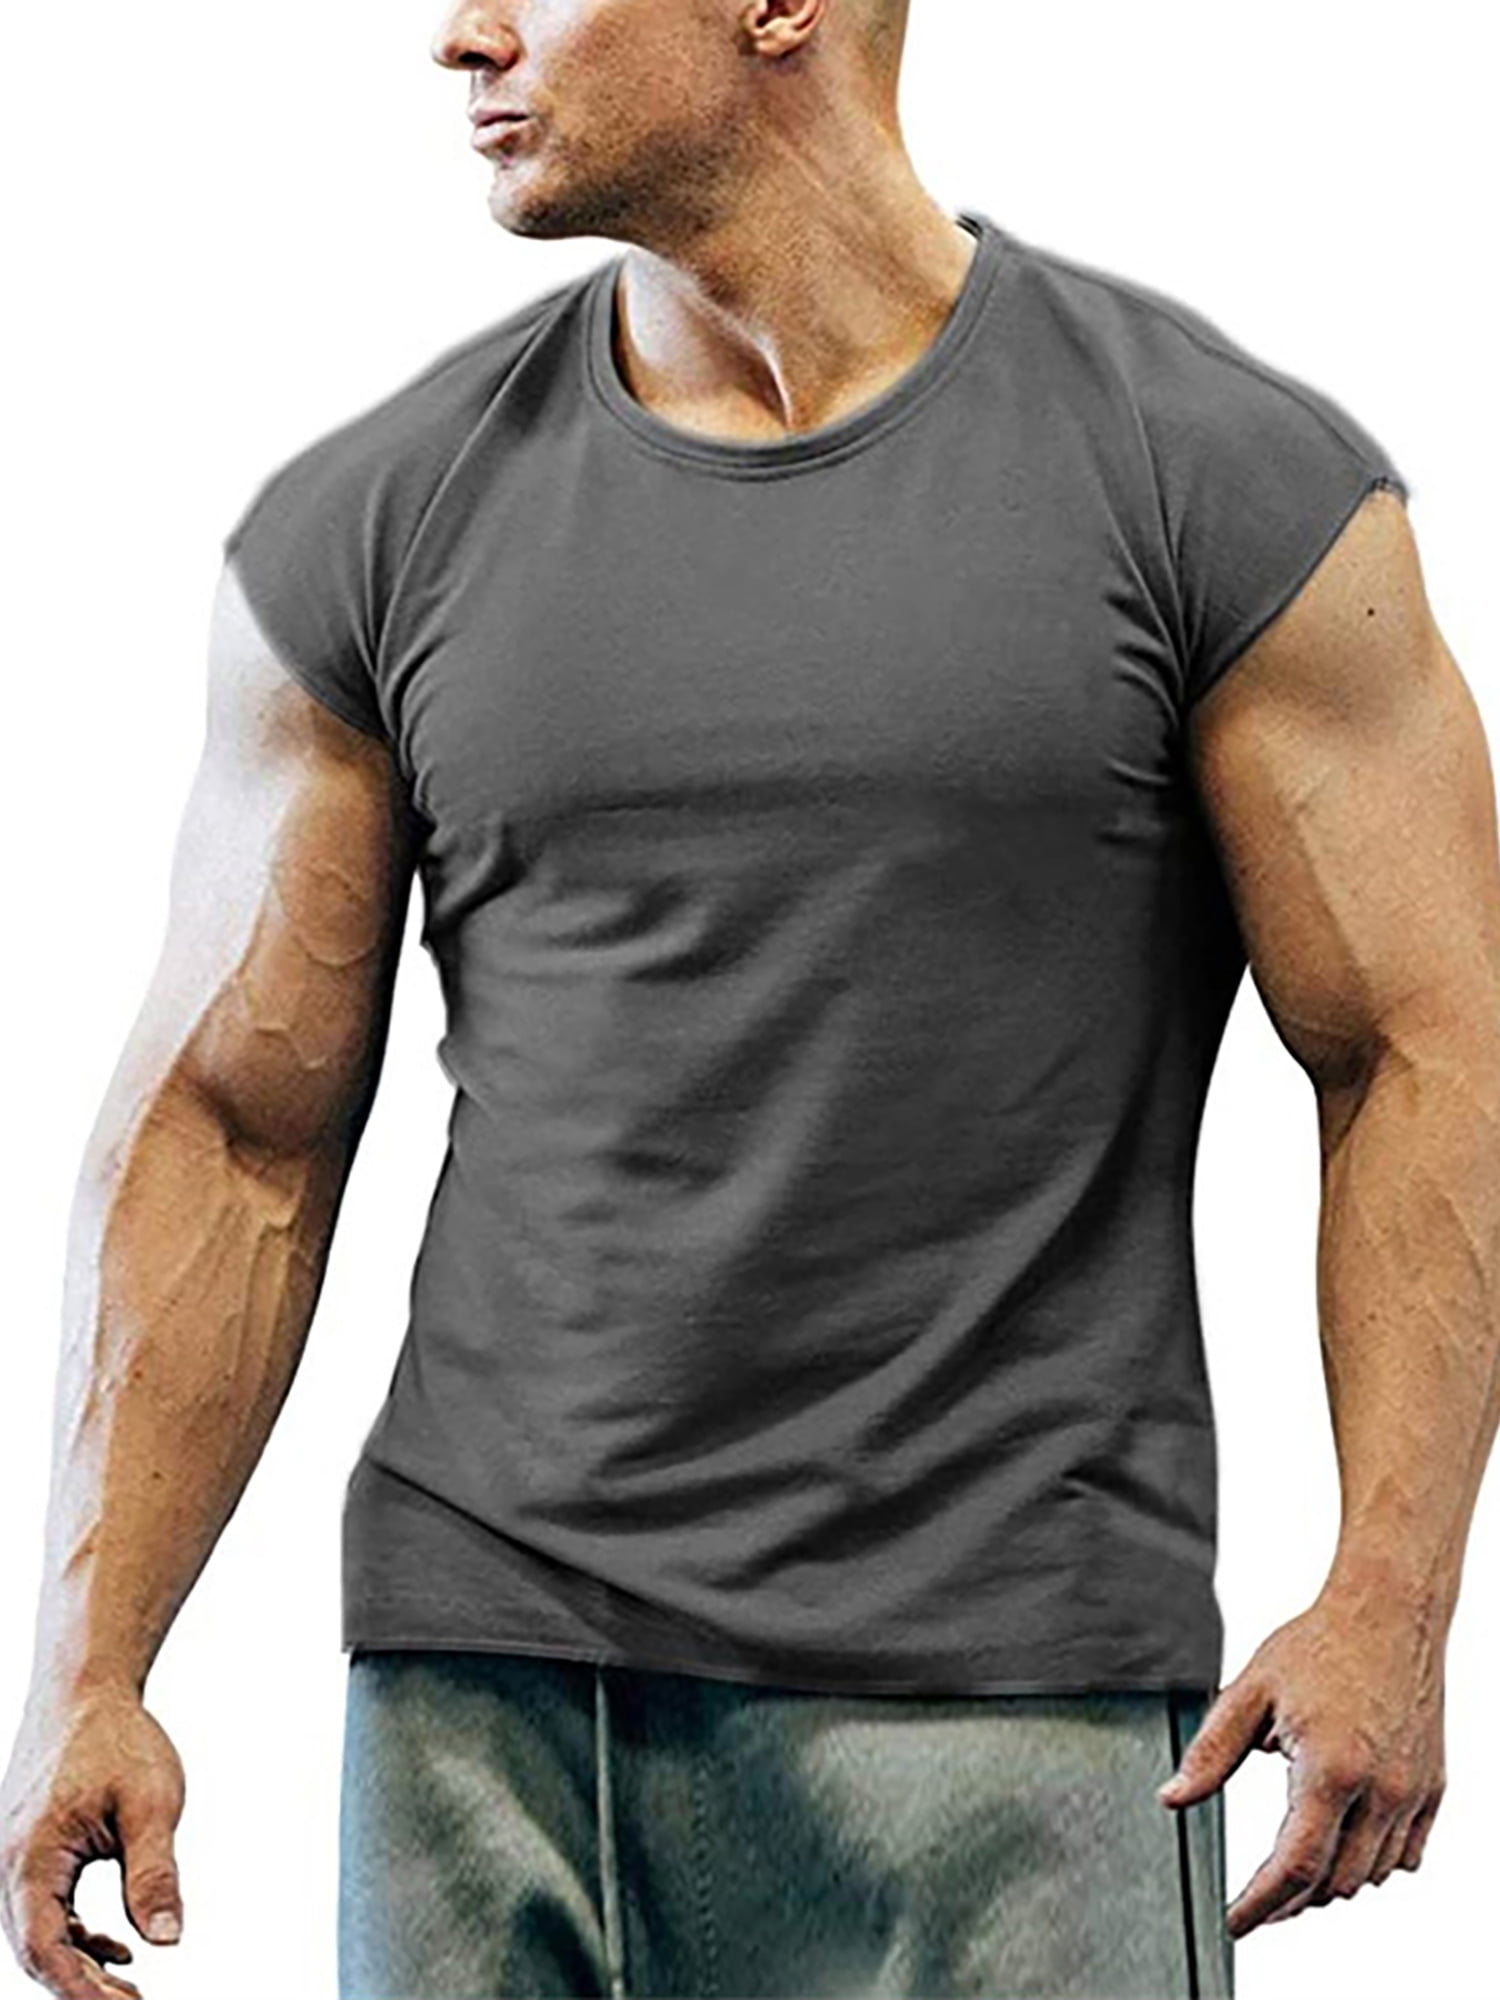 Men Compression Base Layer Tops Short Sleeve Sports GYM Fitness T Shirt Training 